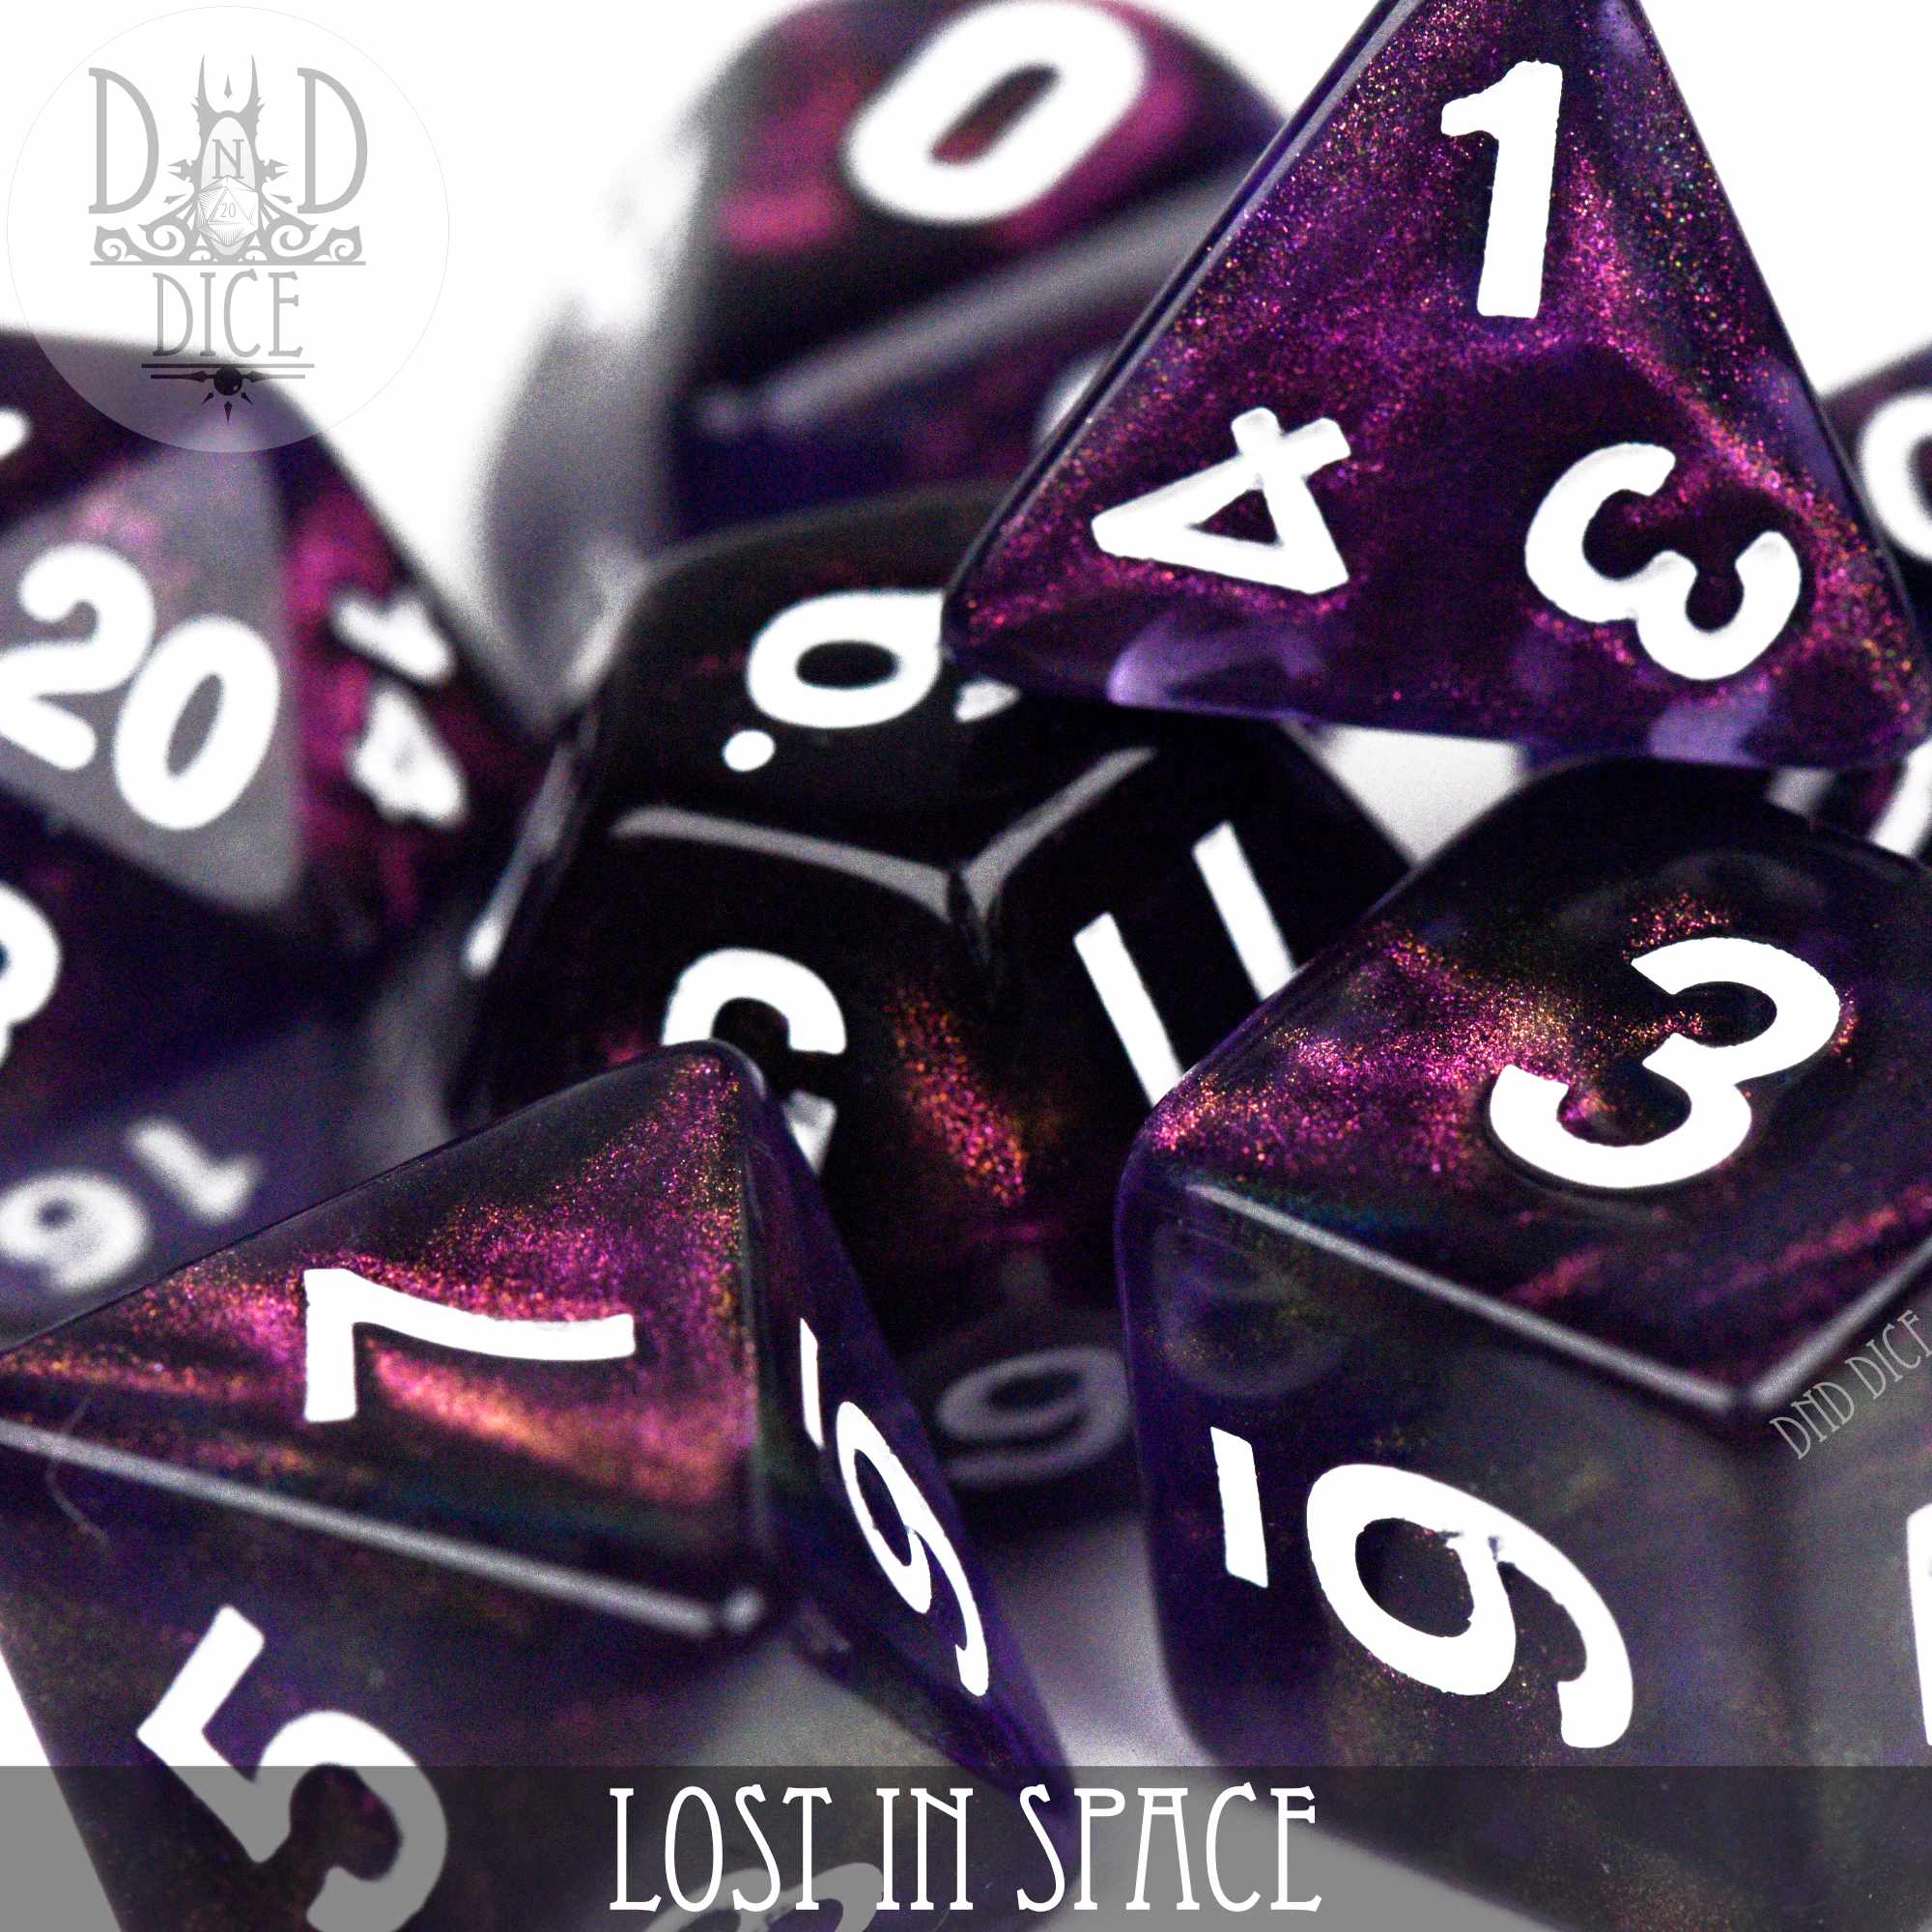 Lost in Space Dice Set